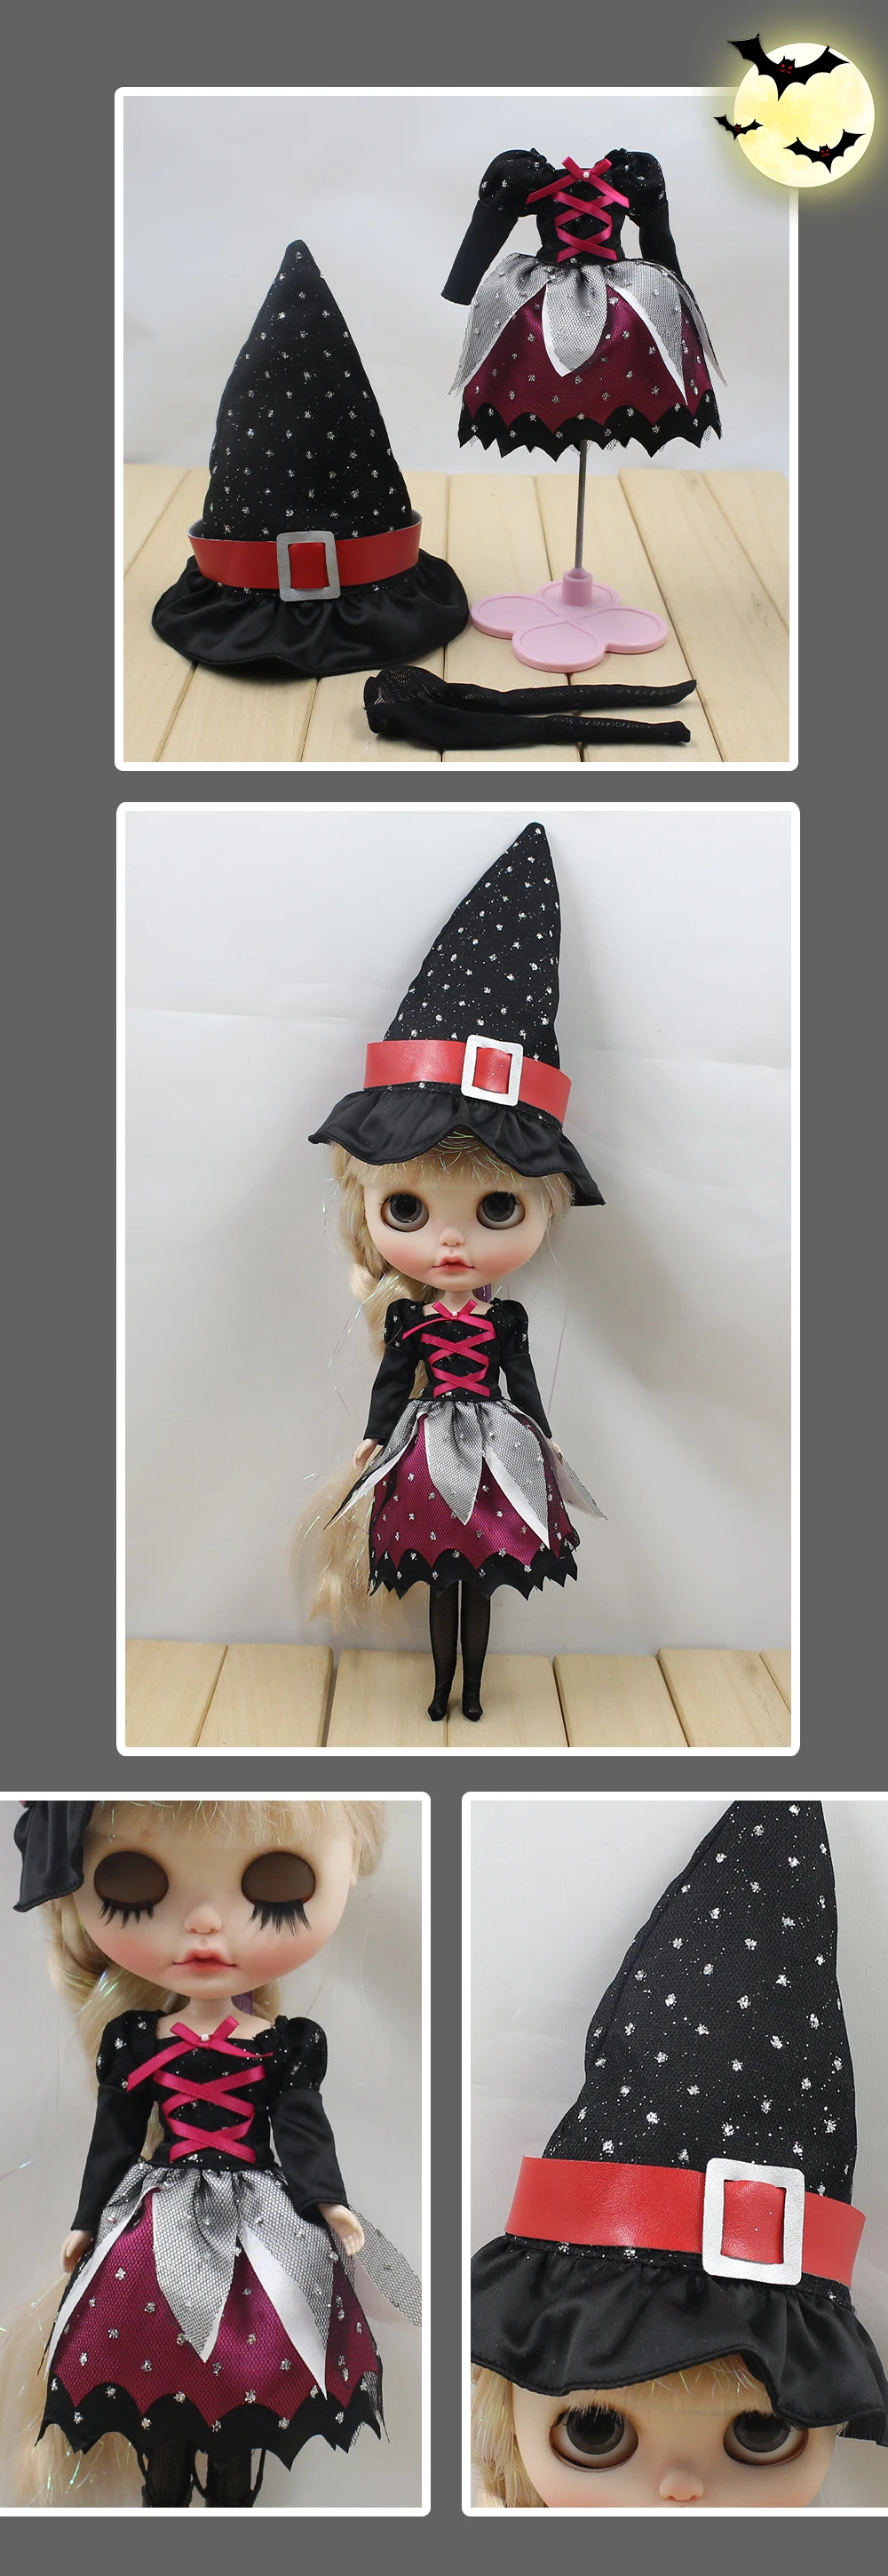 Neo Blythe Doll Halloween Clothes, Costumes & Dresses 1